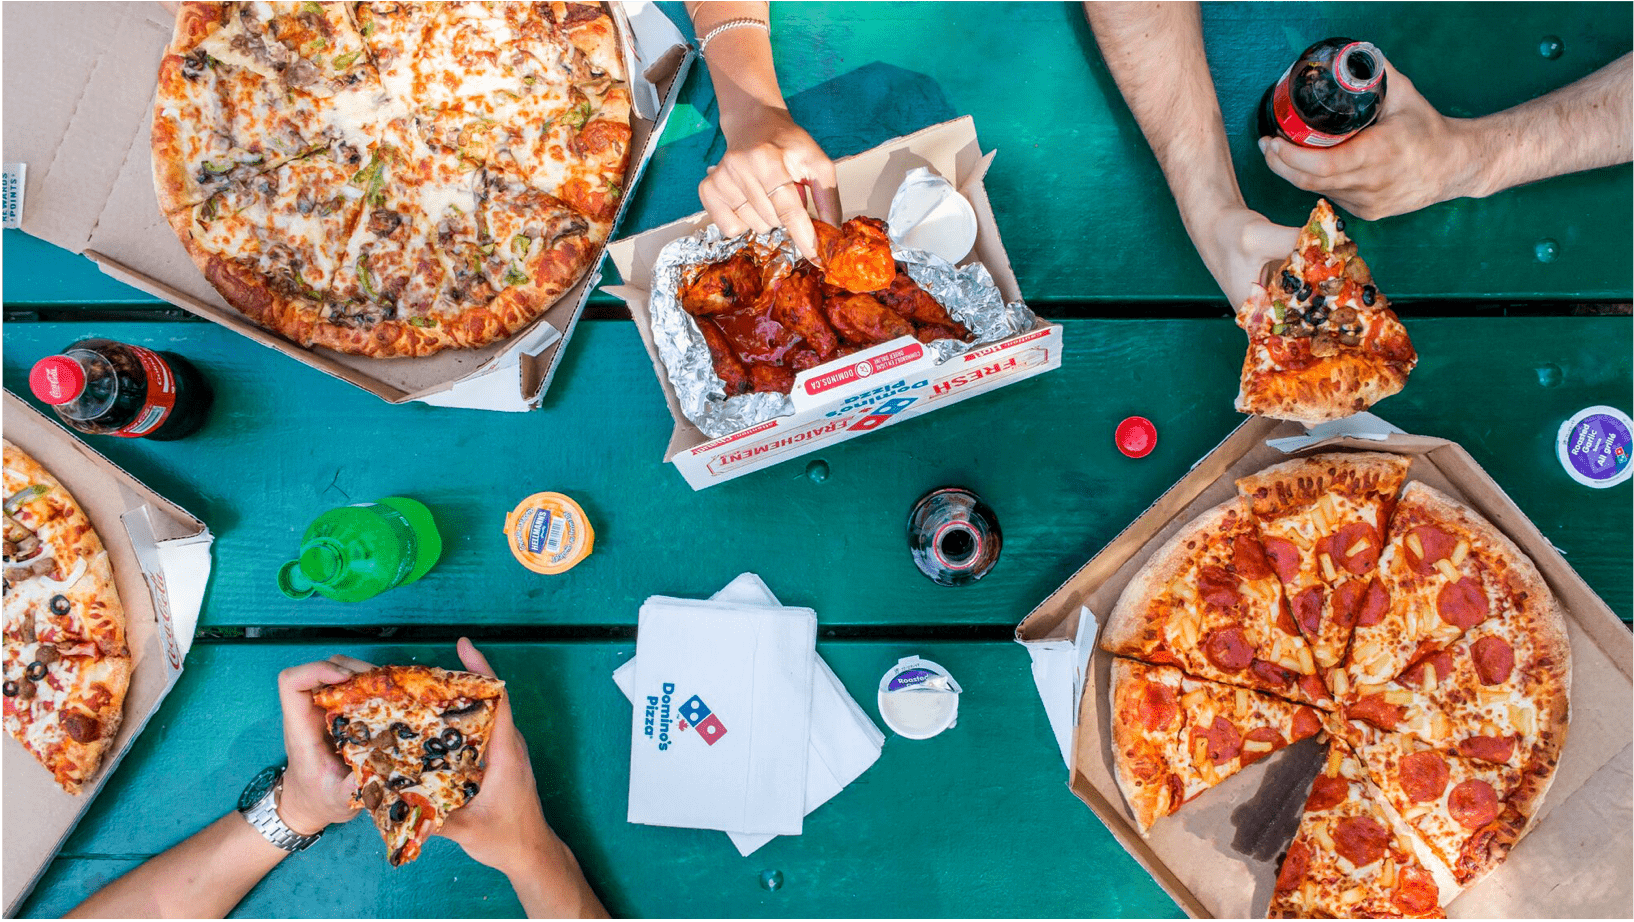 A picture taken from above showing people's hands sharing Domino's pizza and wings